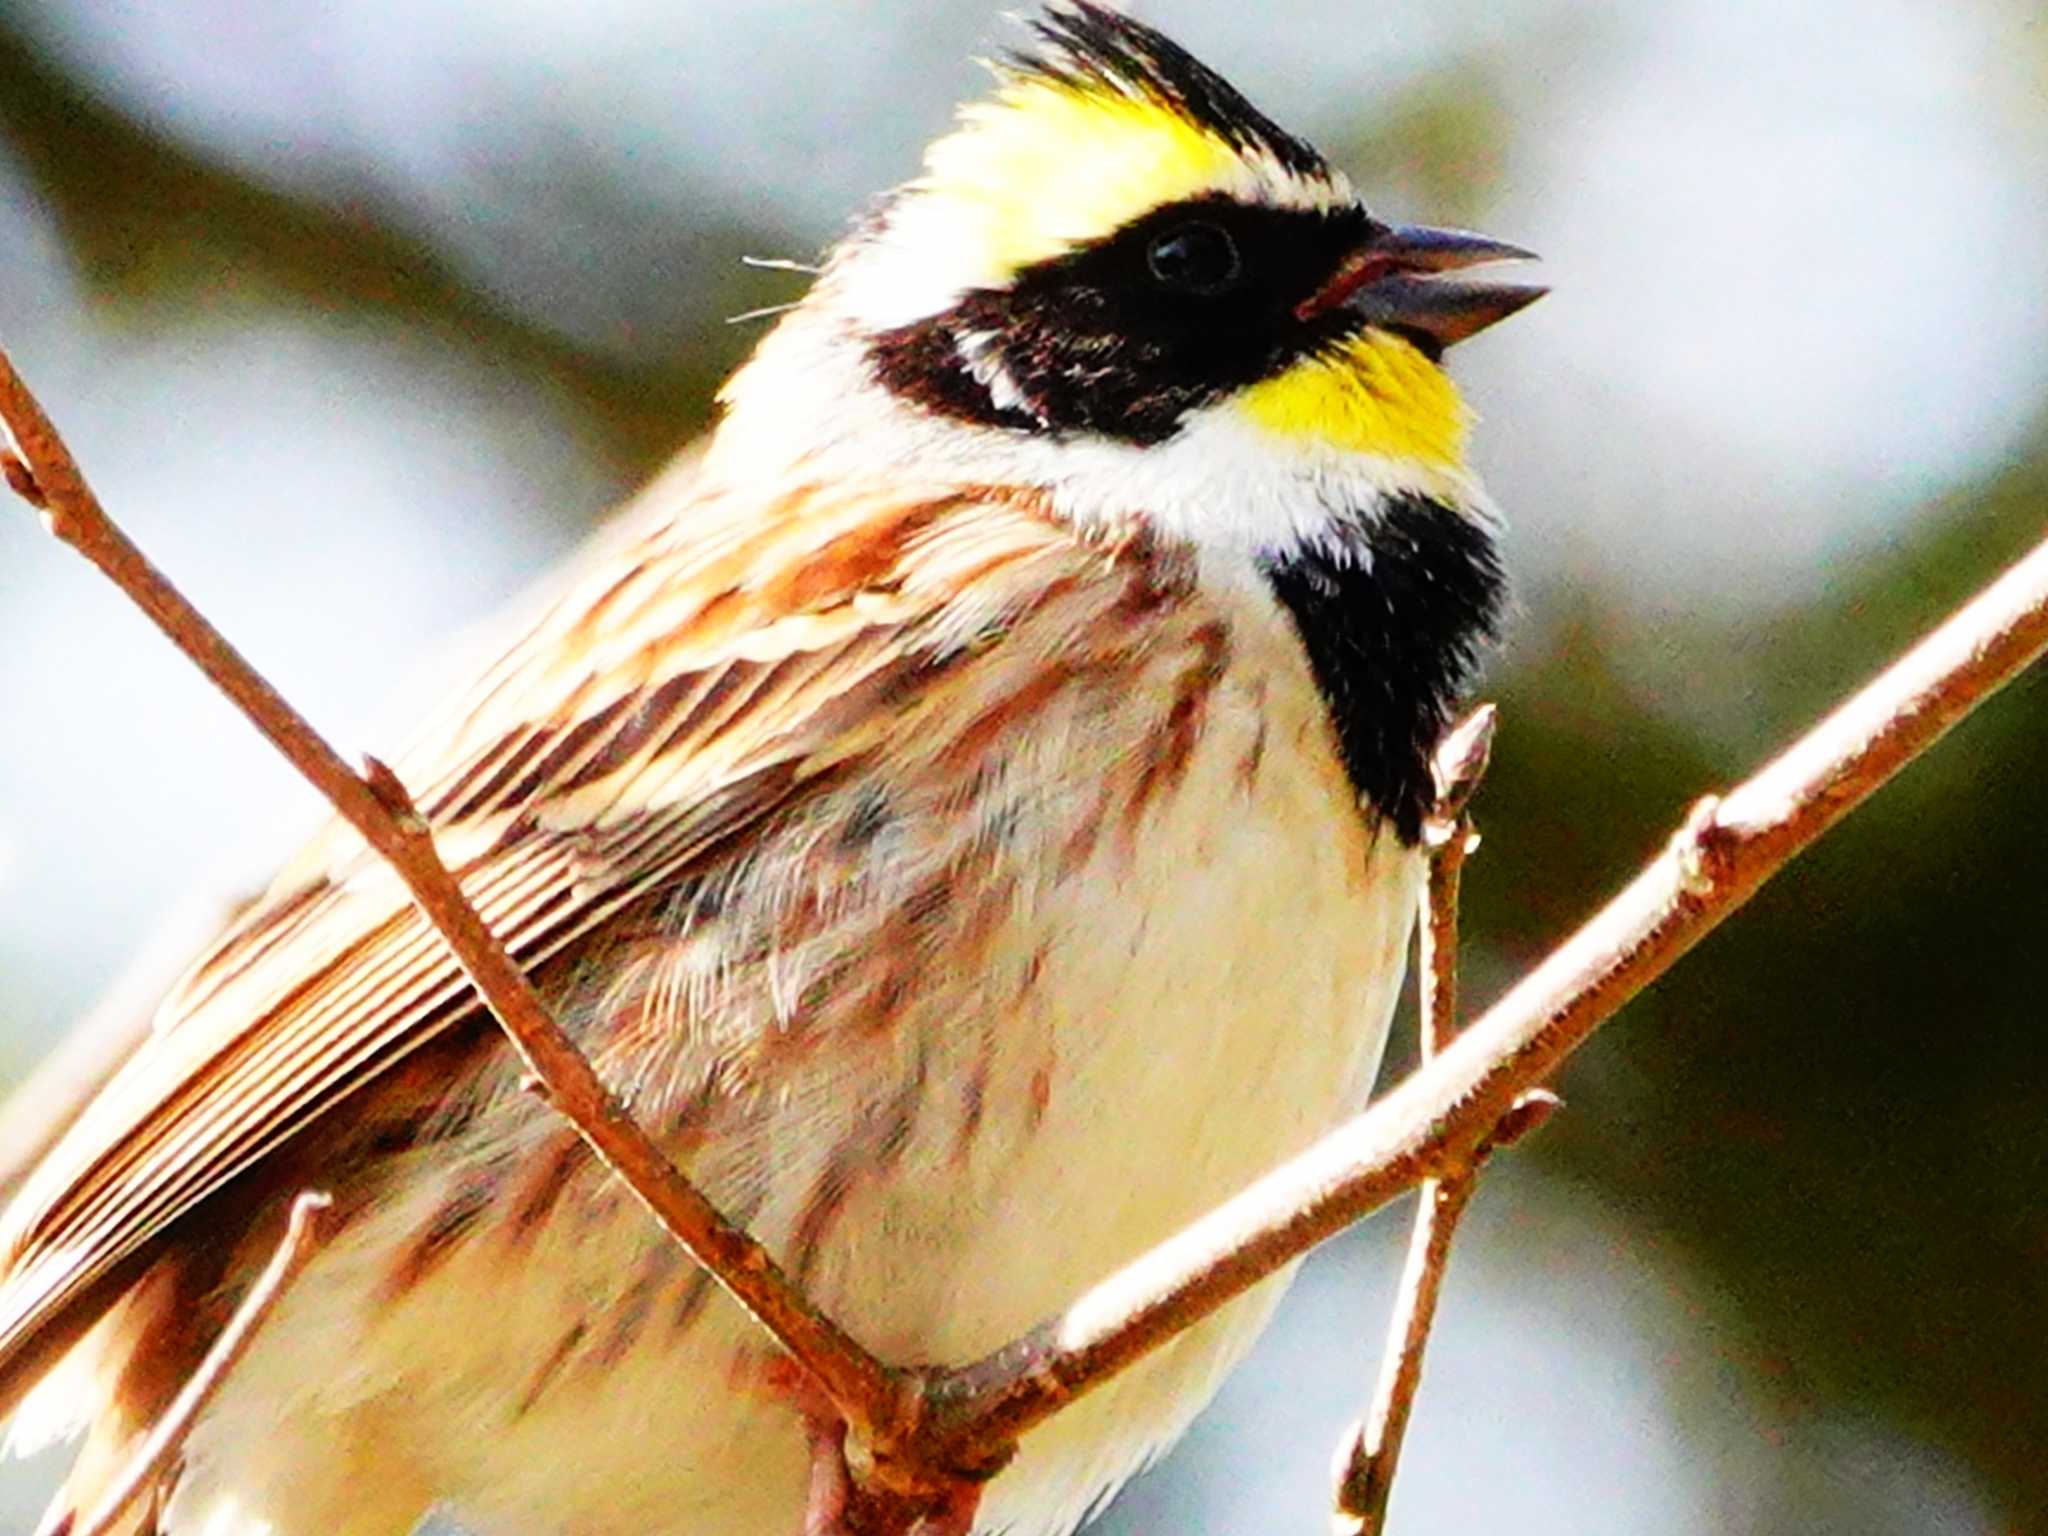 Photo of Yellow-throated Bunting at 稲佐山公園 by M Yama